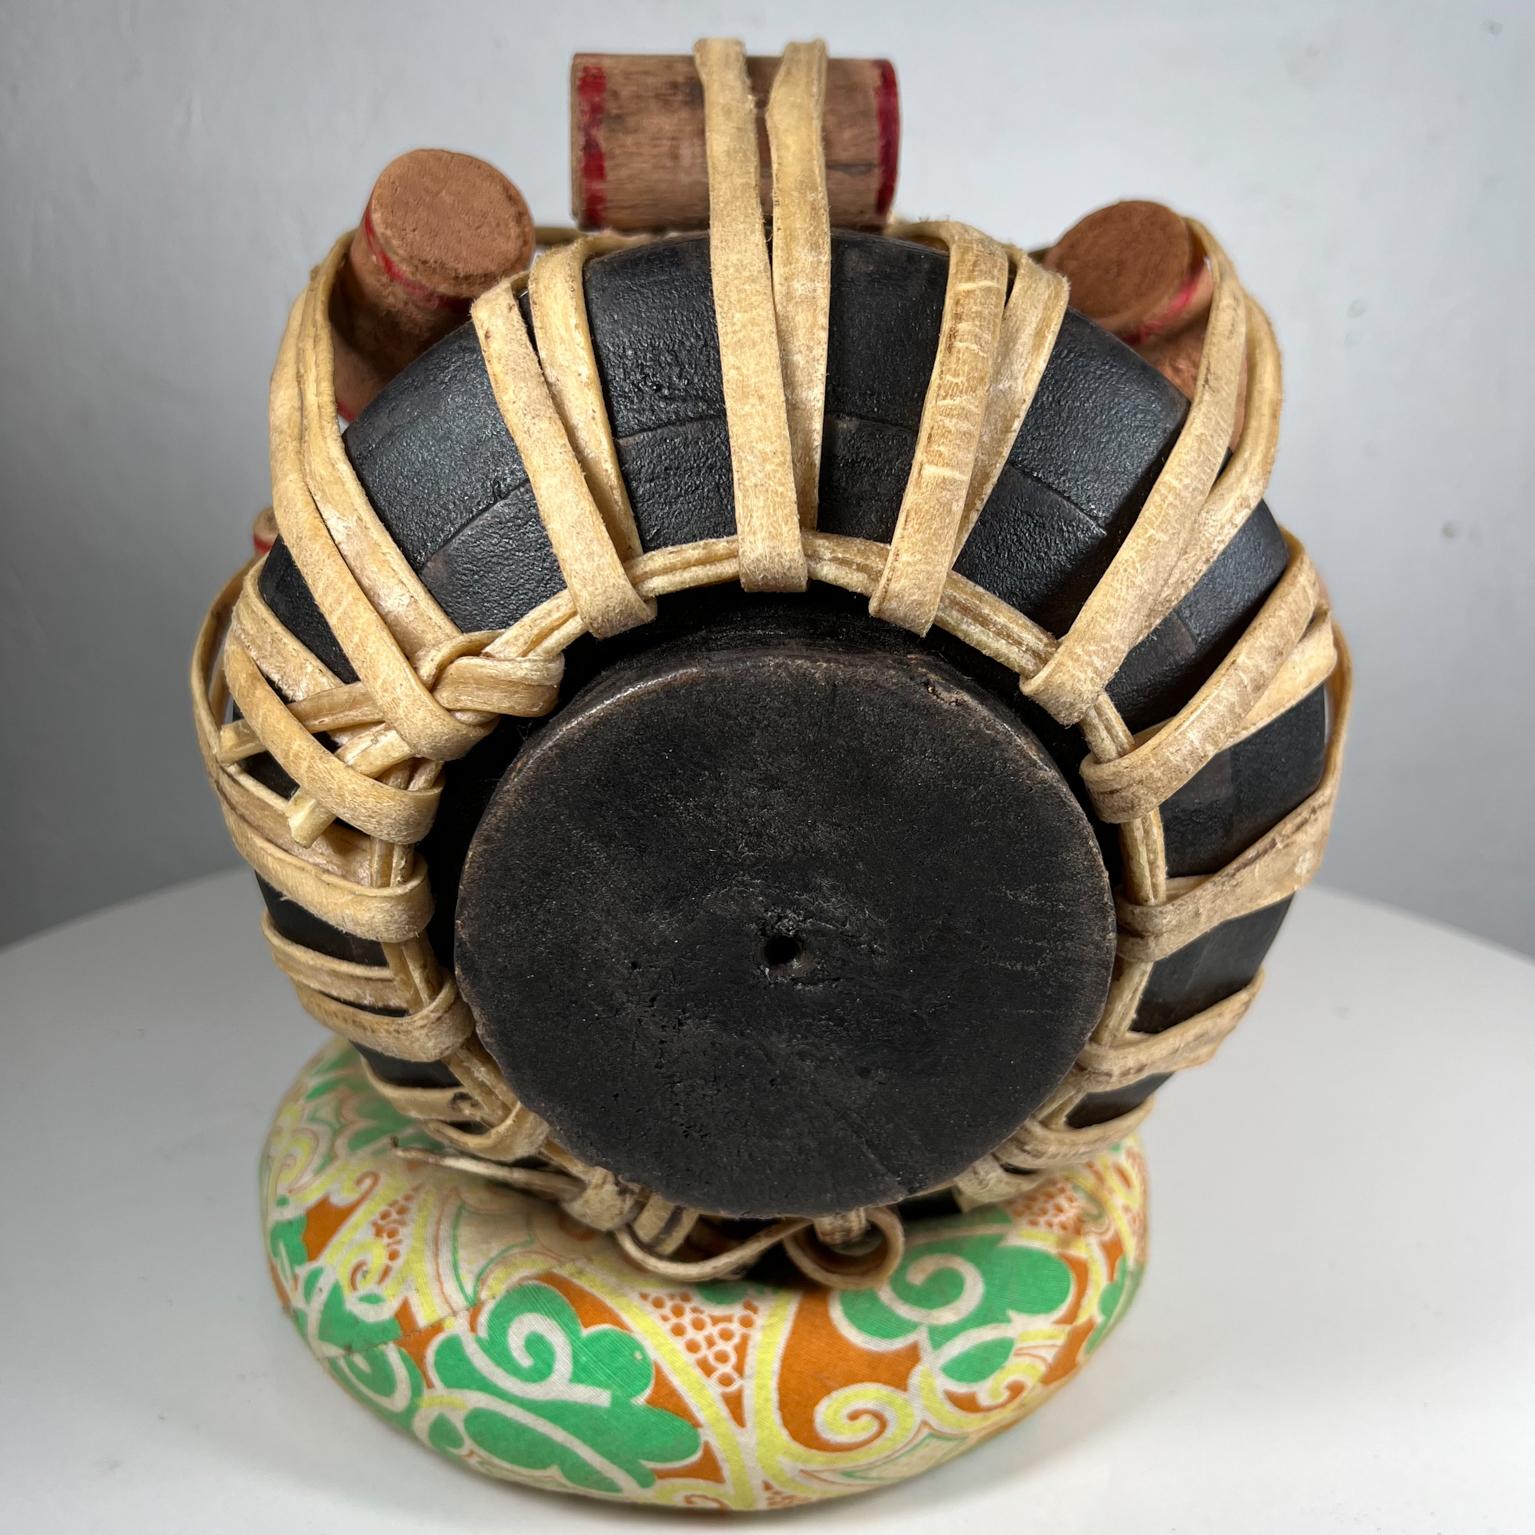 1970s Vintage Musical Tabla Wood Drum from Bombay India 1